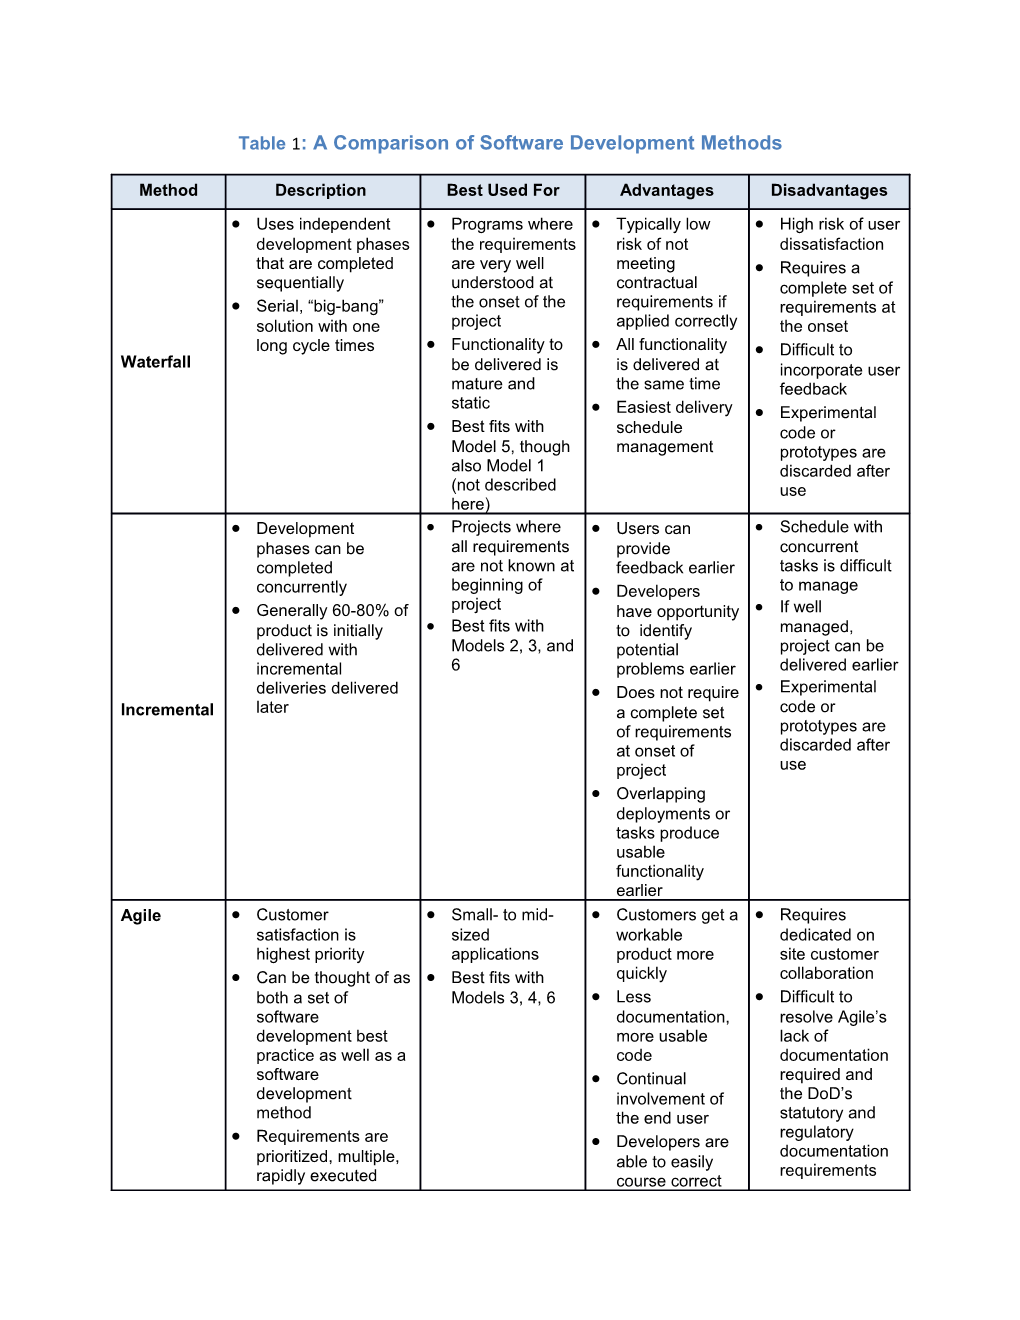 Chapter 6 Table 4: a Comparison of Software Development Methods